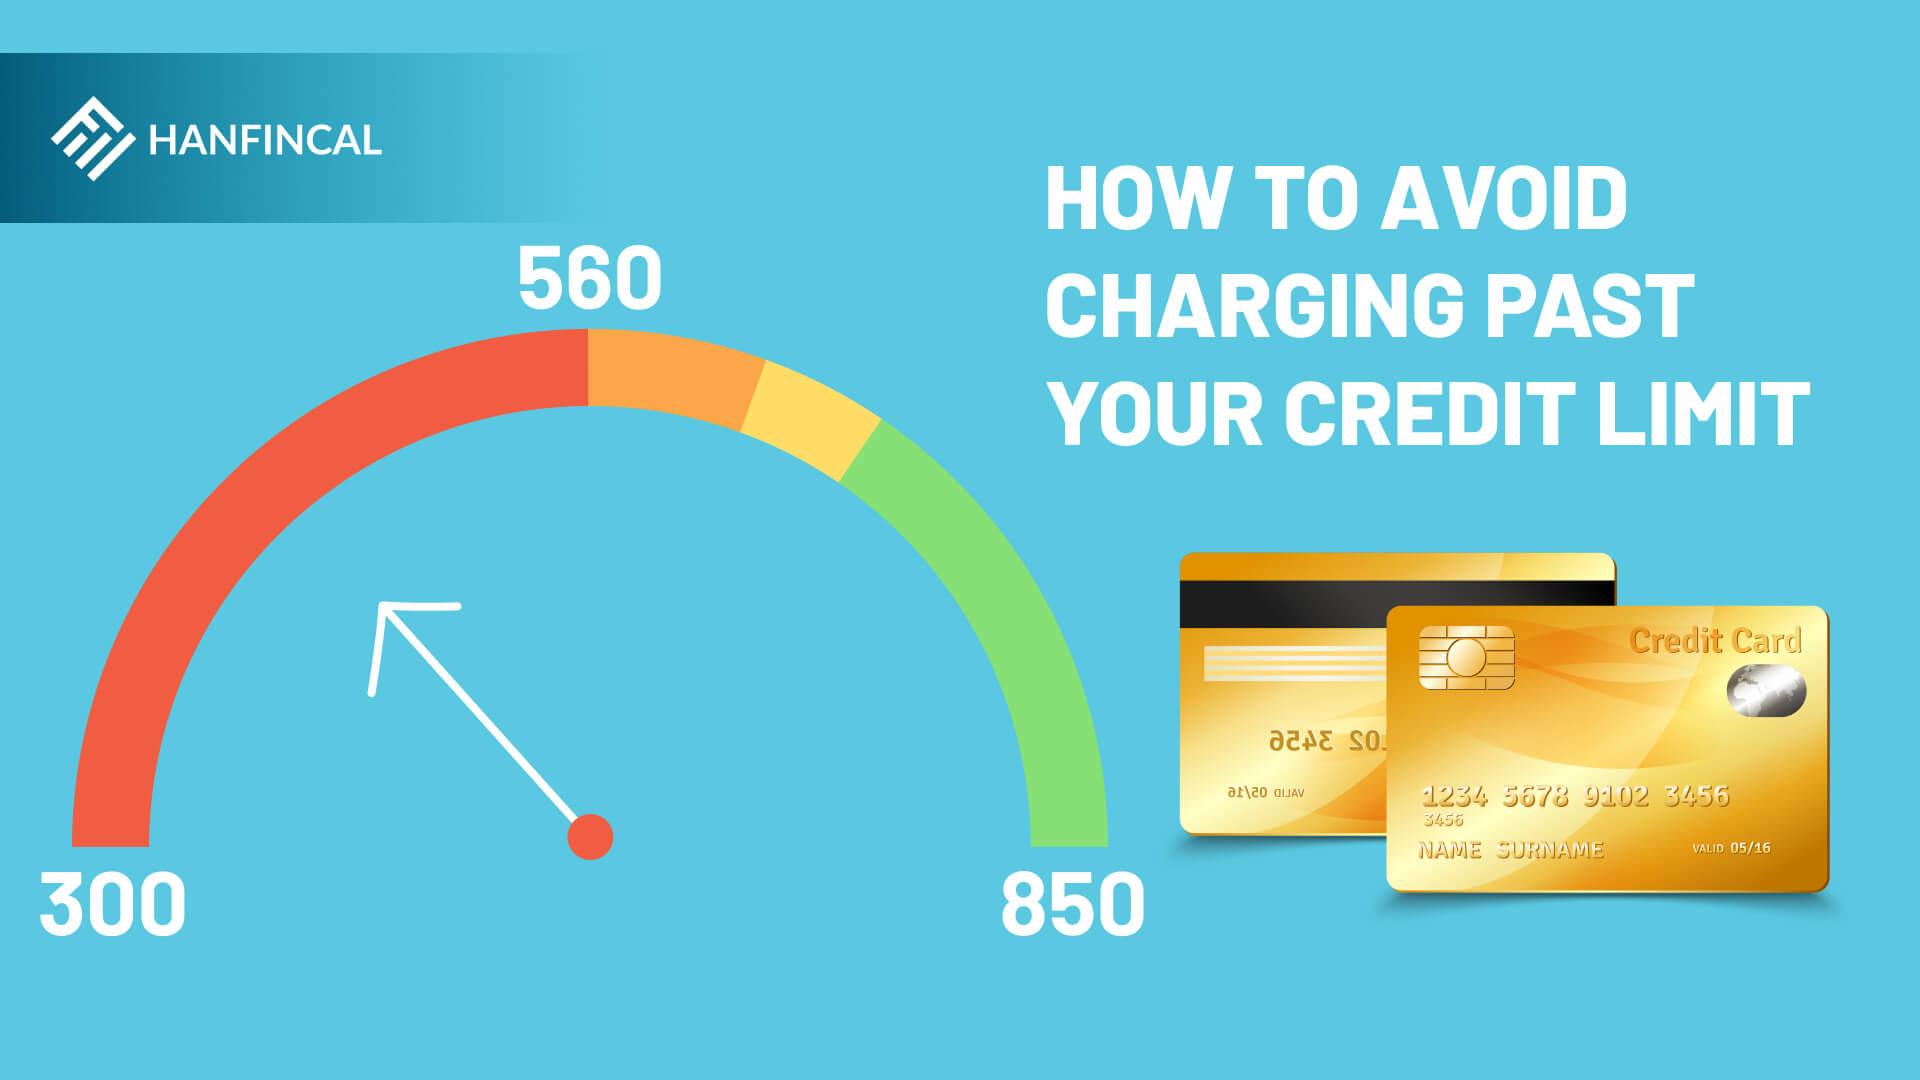 How to avoid charging past your credit limit?